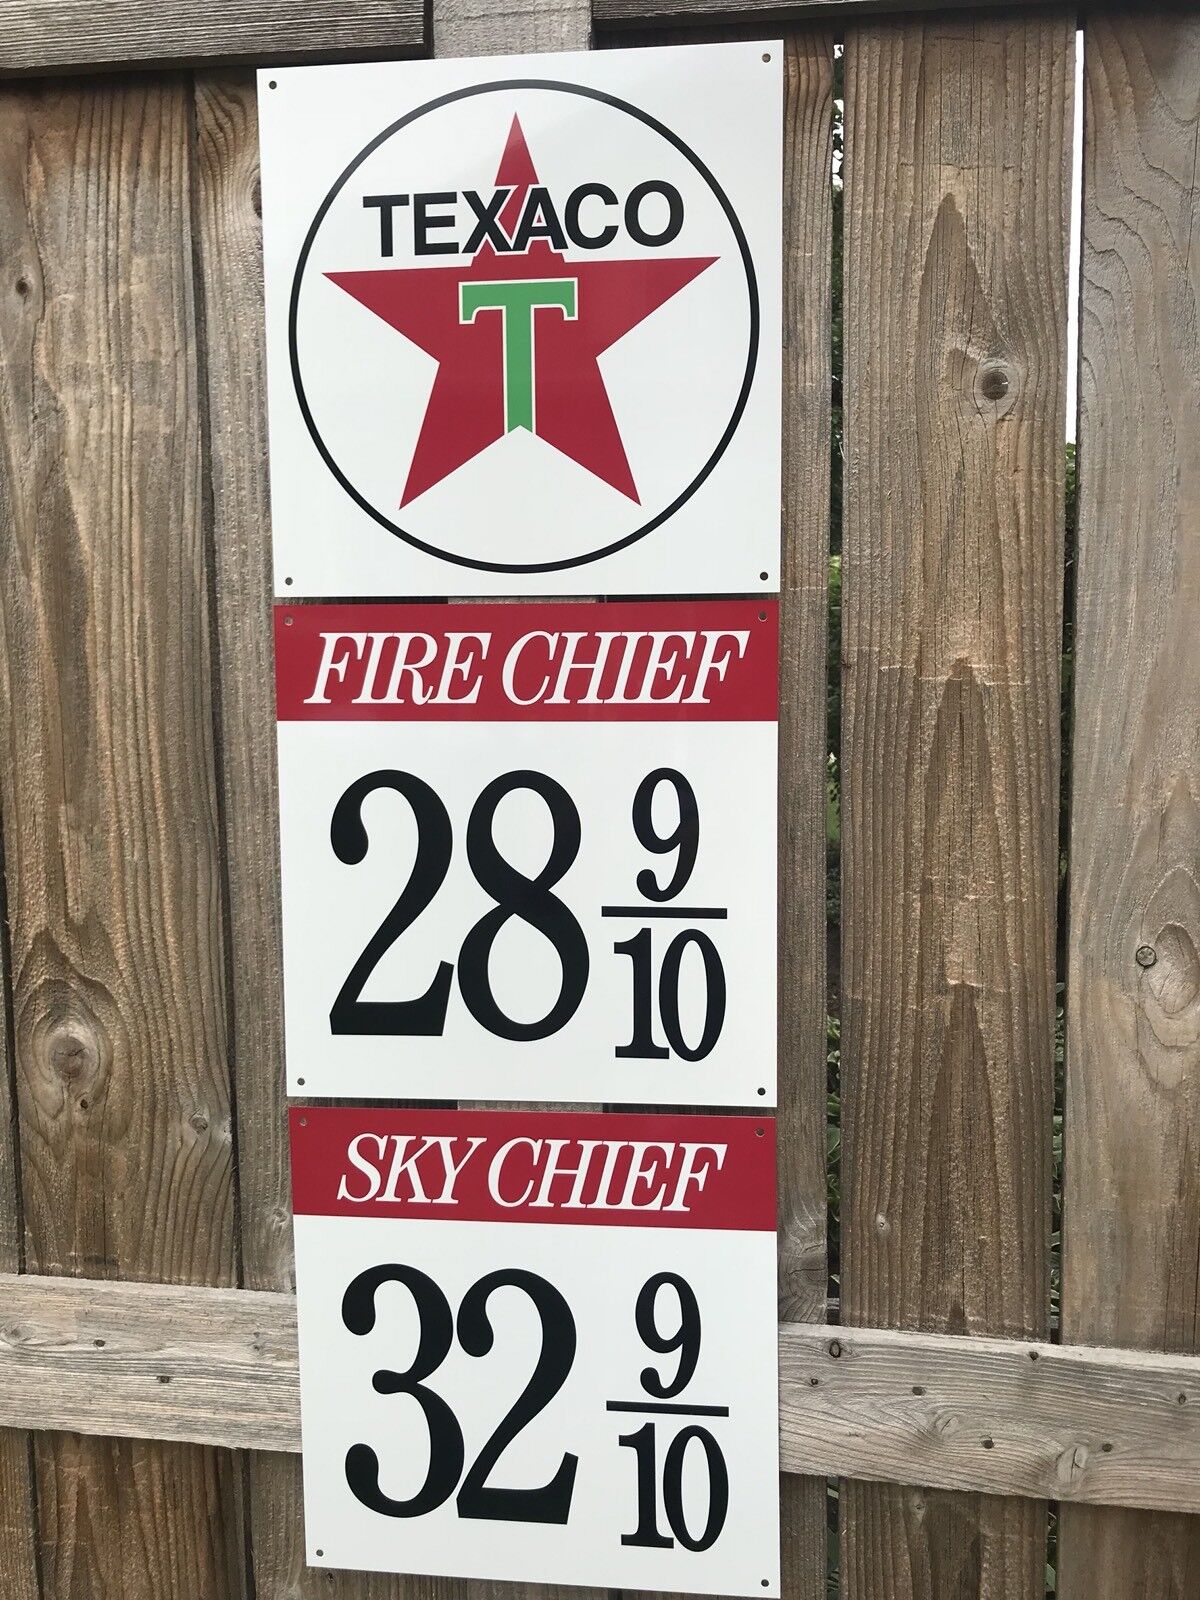 Texaco gasoline advertising sign rare 3 piece sign vintage reproduction 1940-50s